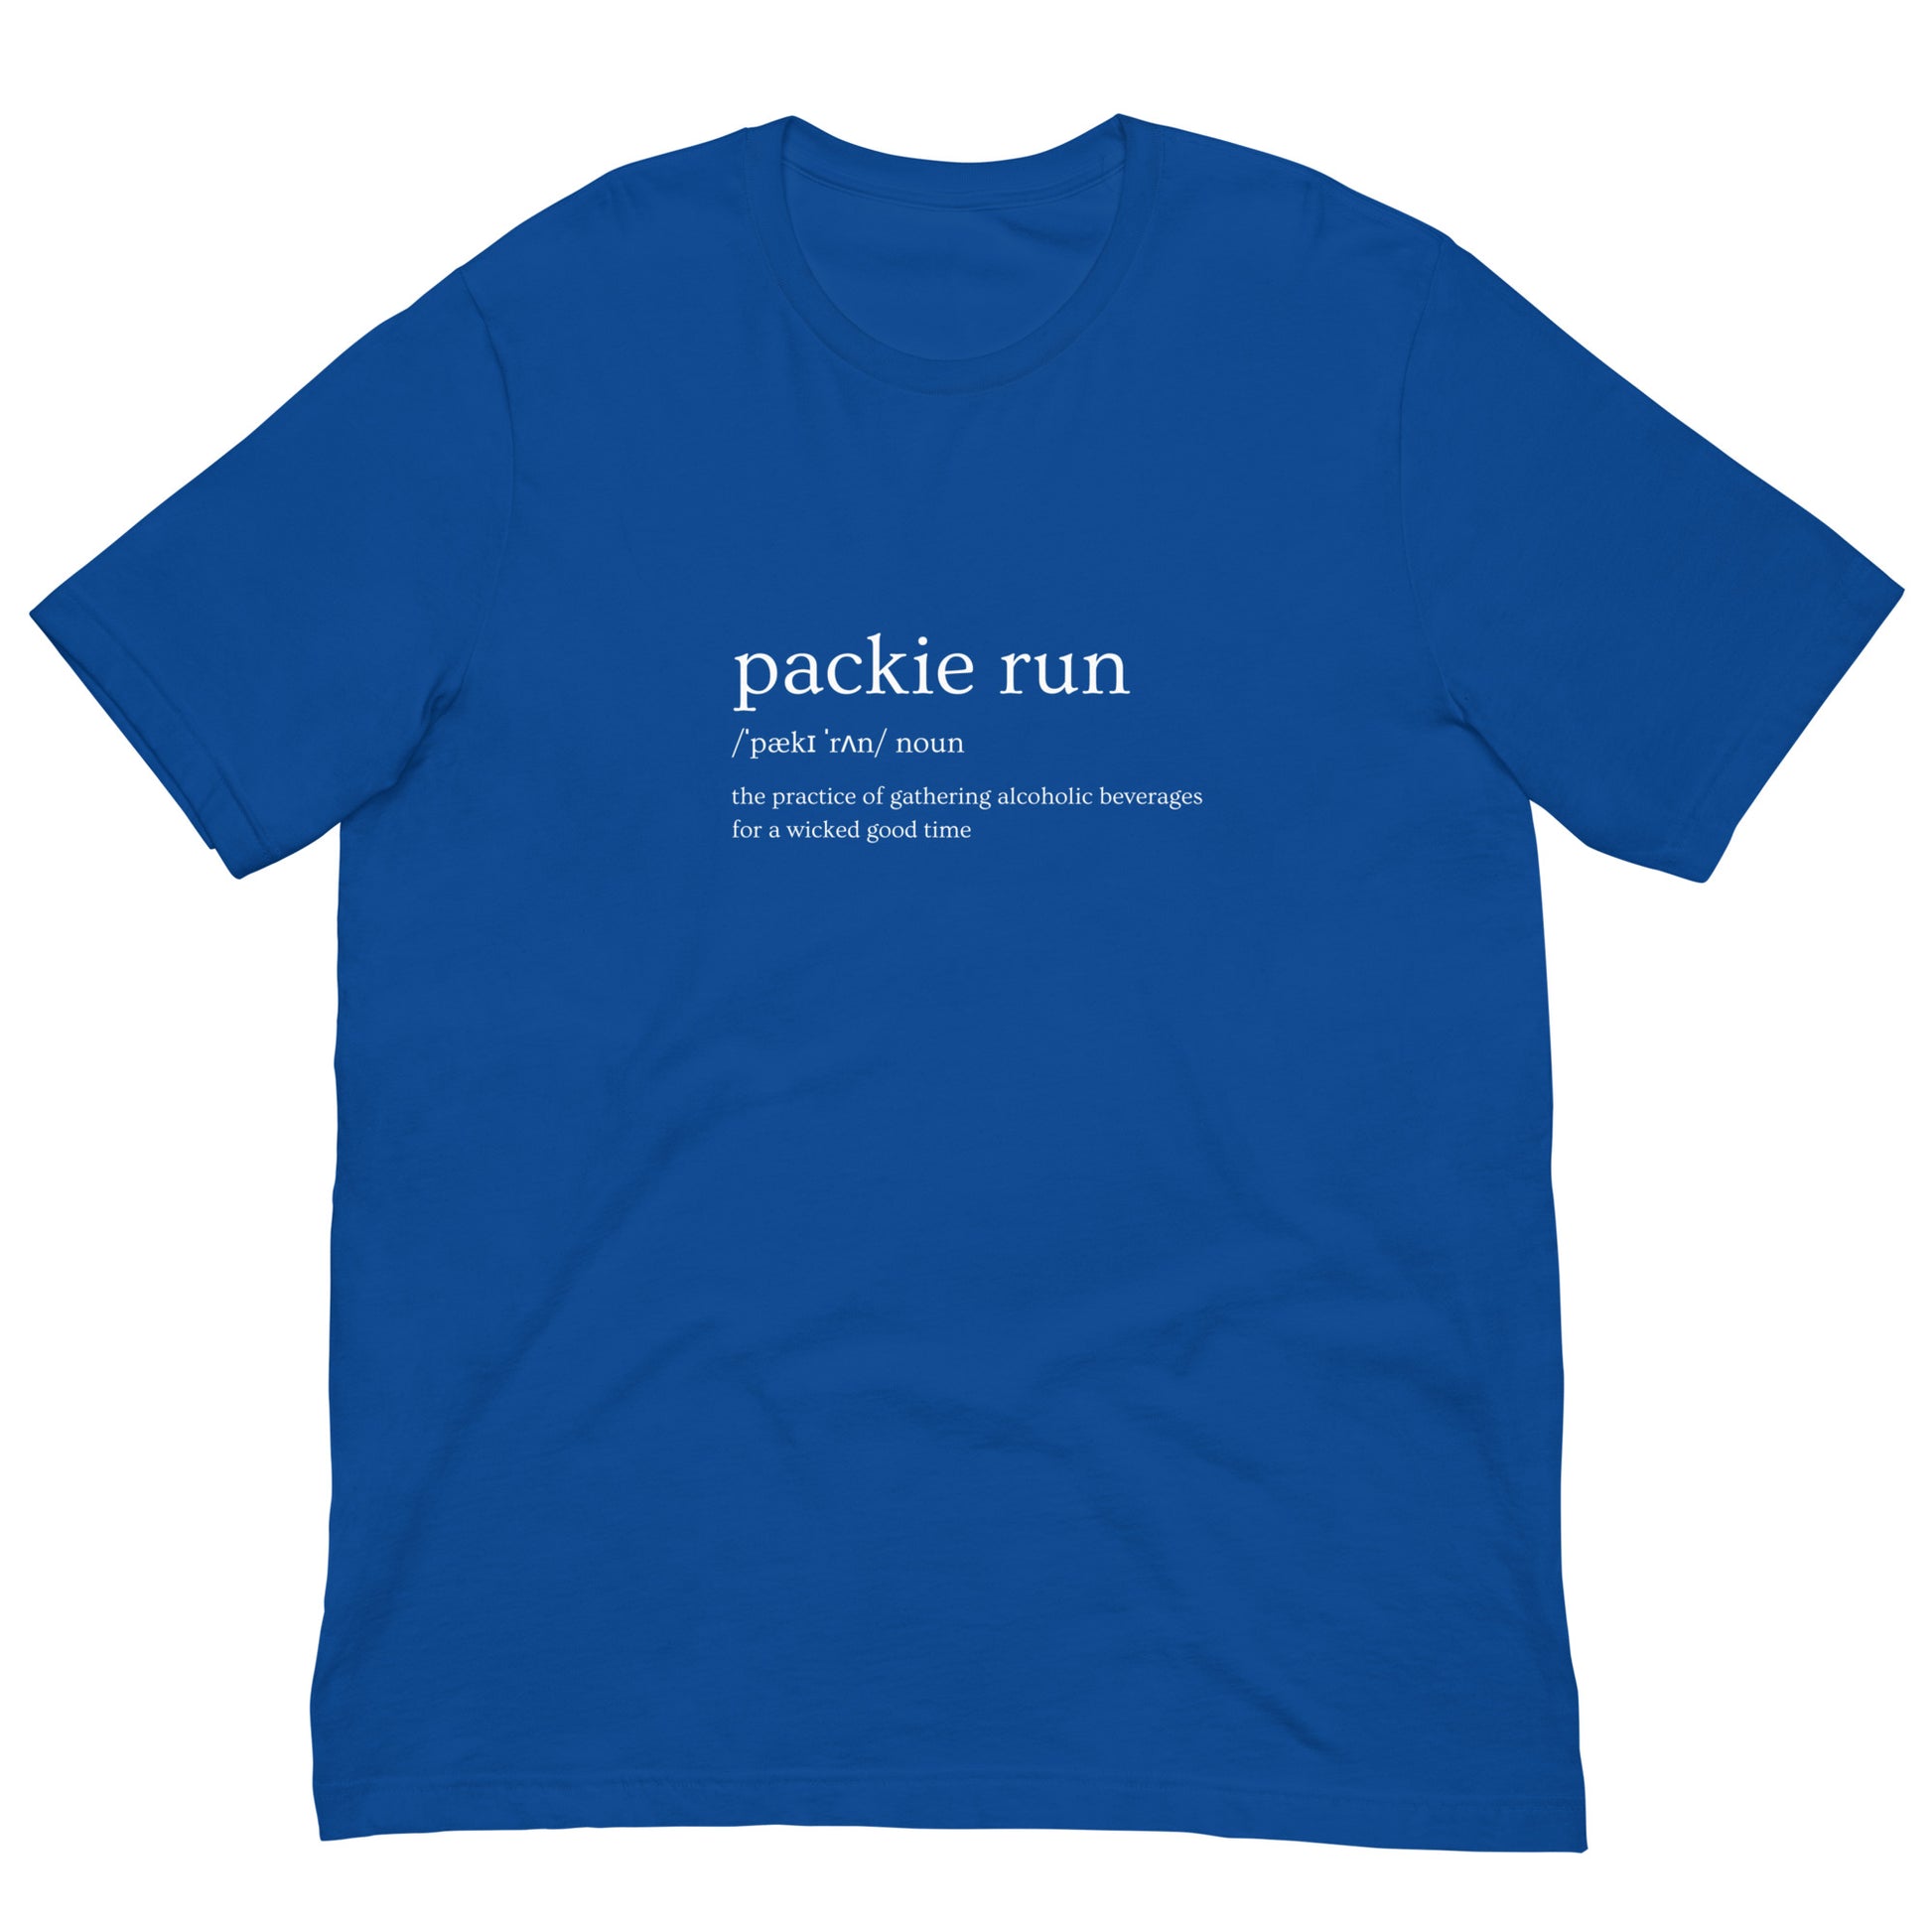 royal blue tshirt that says "packie run, noun, the practice of gathering alcoholic beverages for a wicked good time"